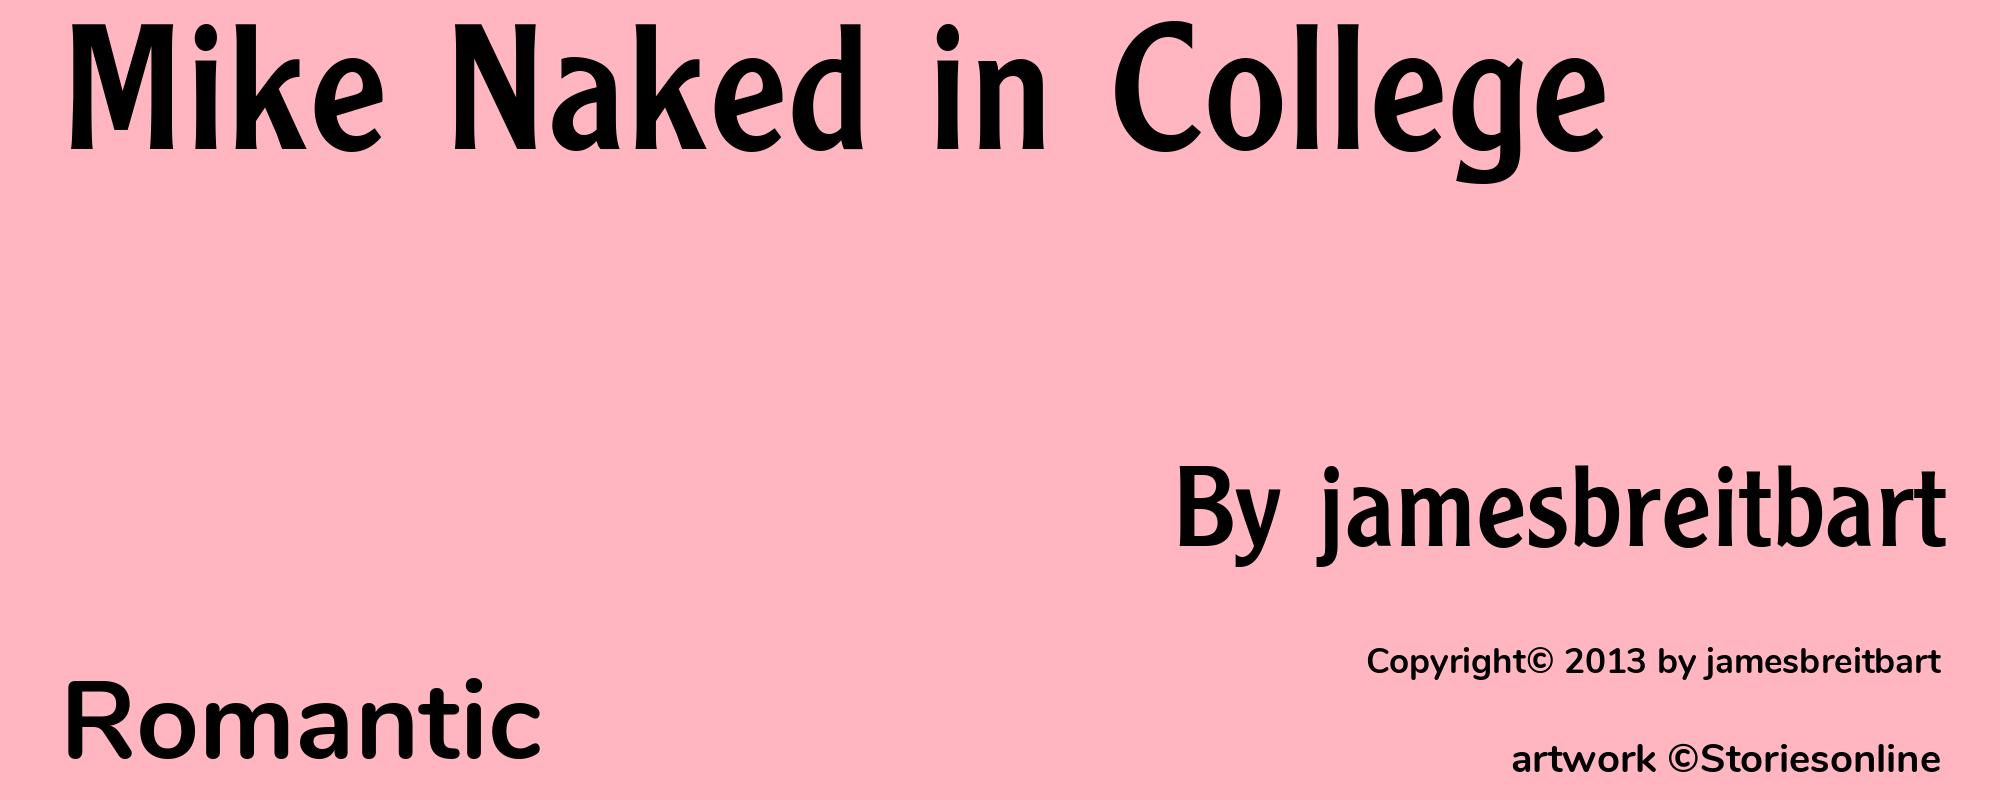 Mike Naked in College - Cover